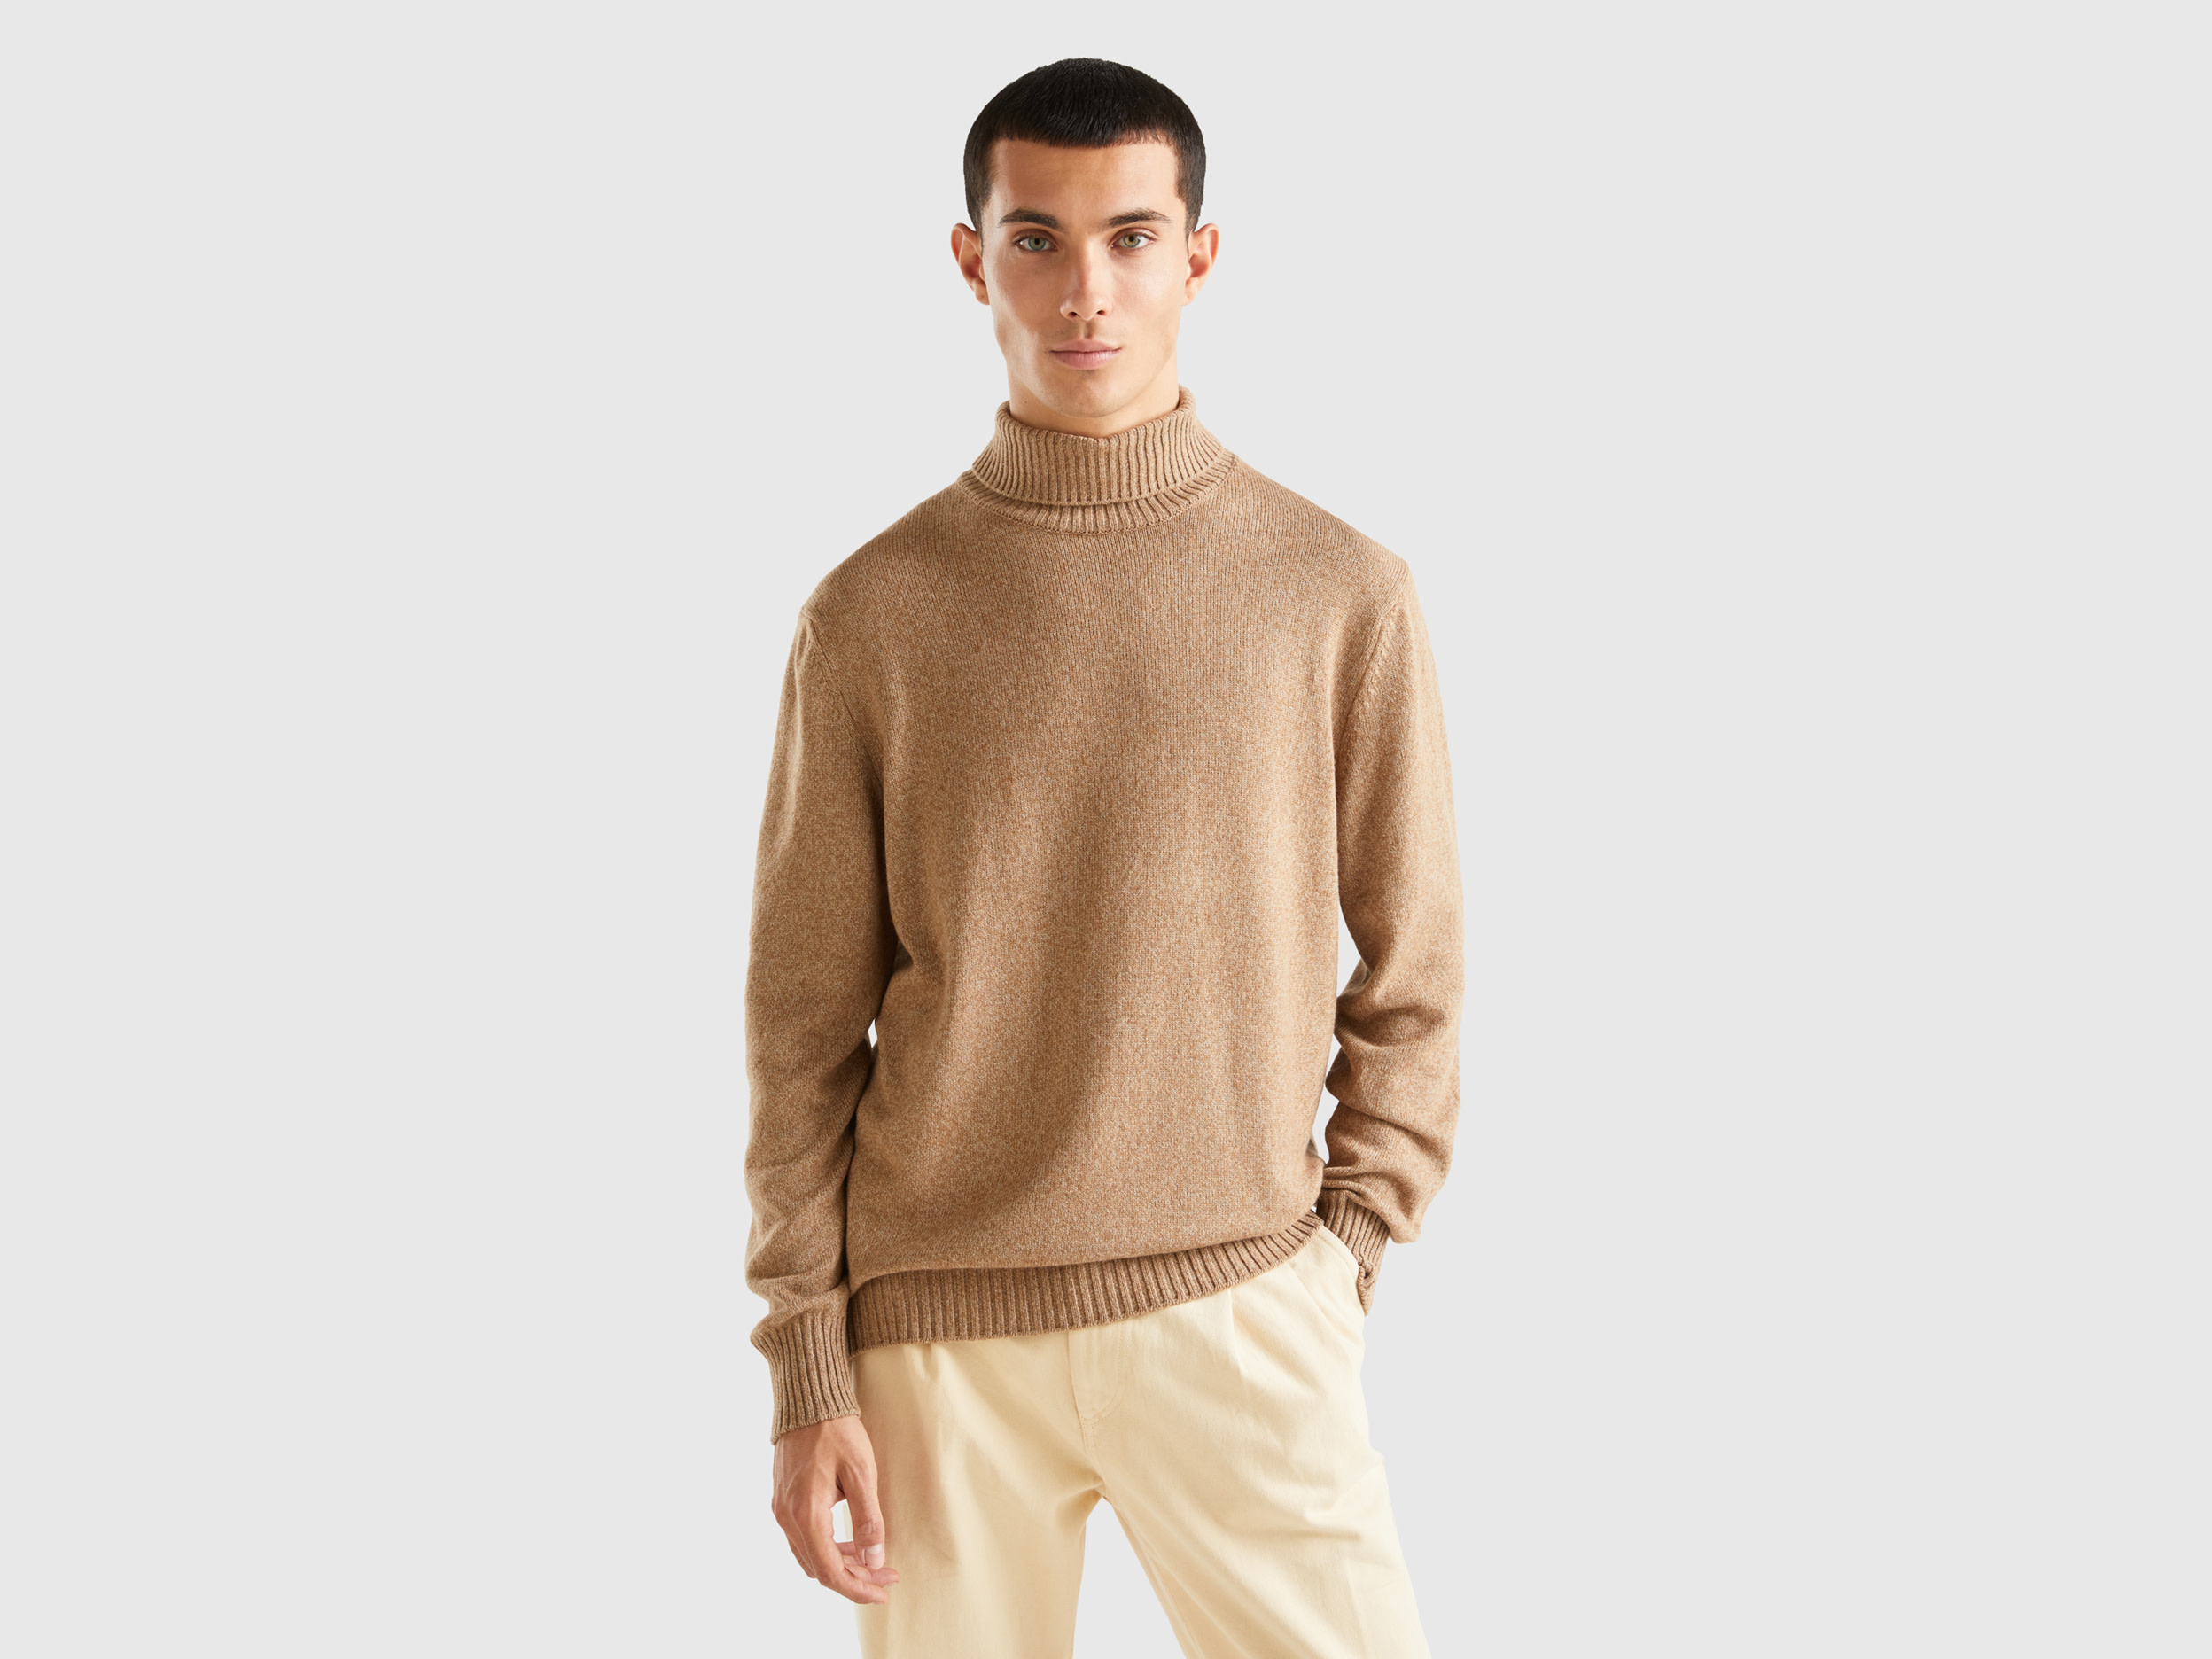 Benetton, Turtleneck Sweater In Cashmere And Wool Blend, size S, Beige, Men